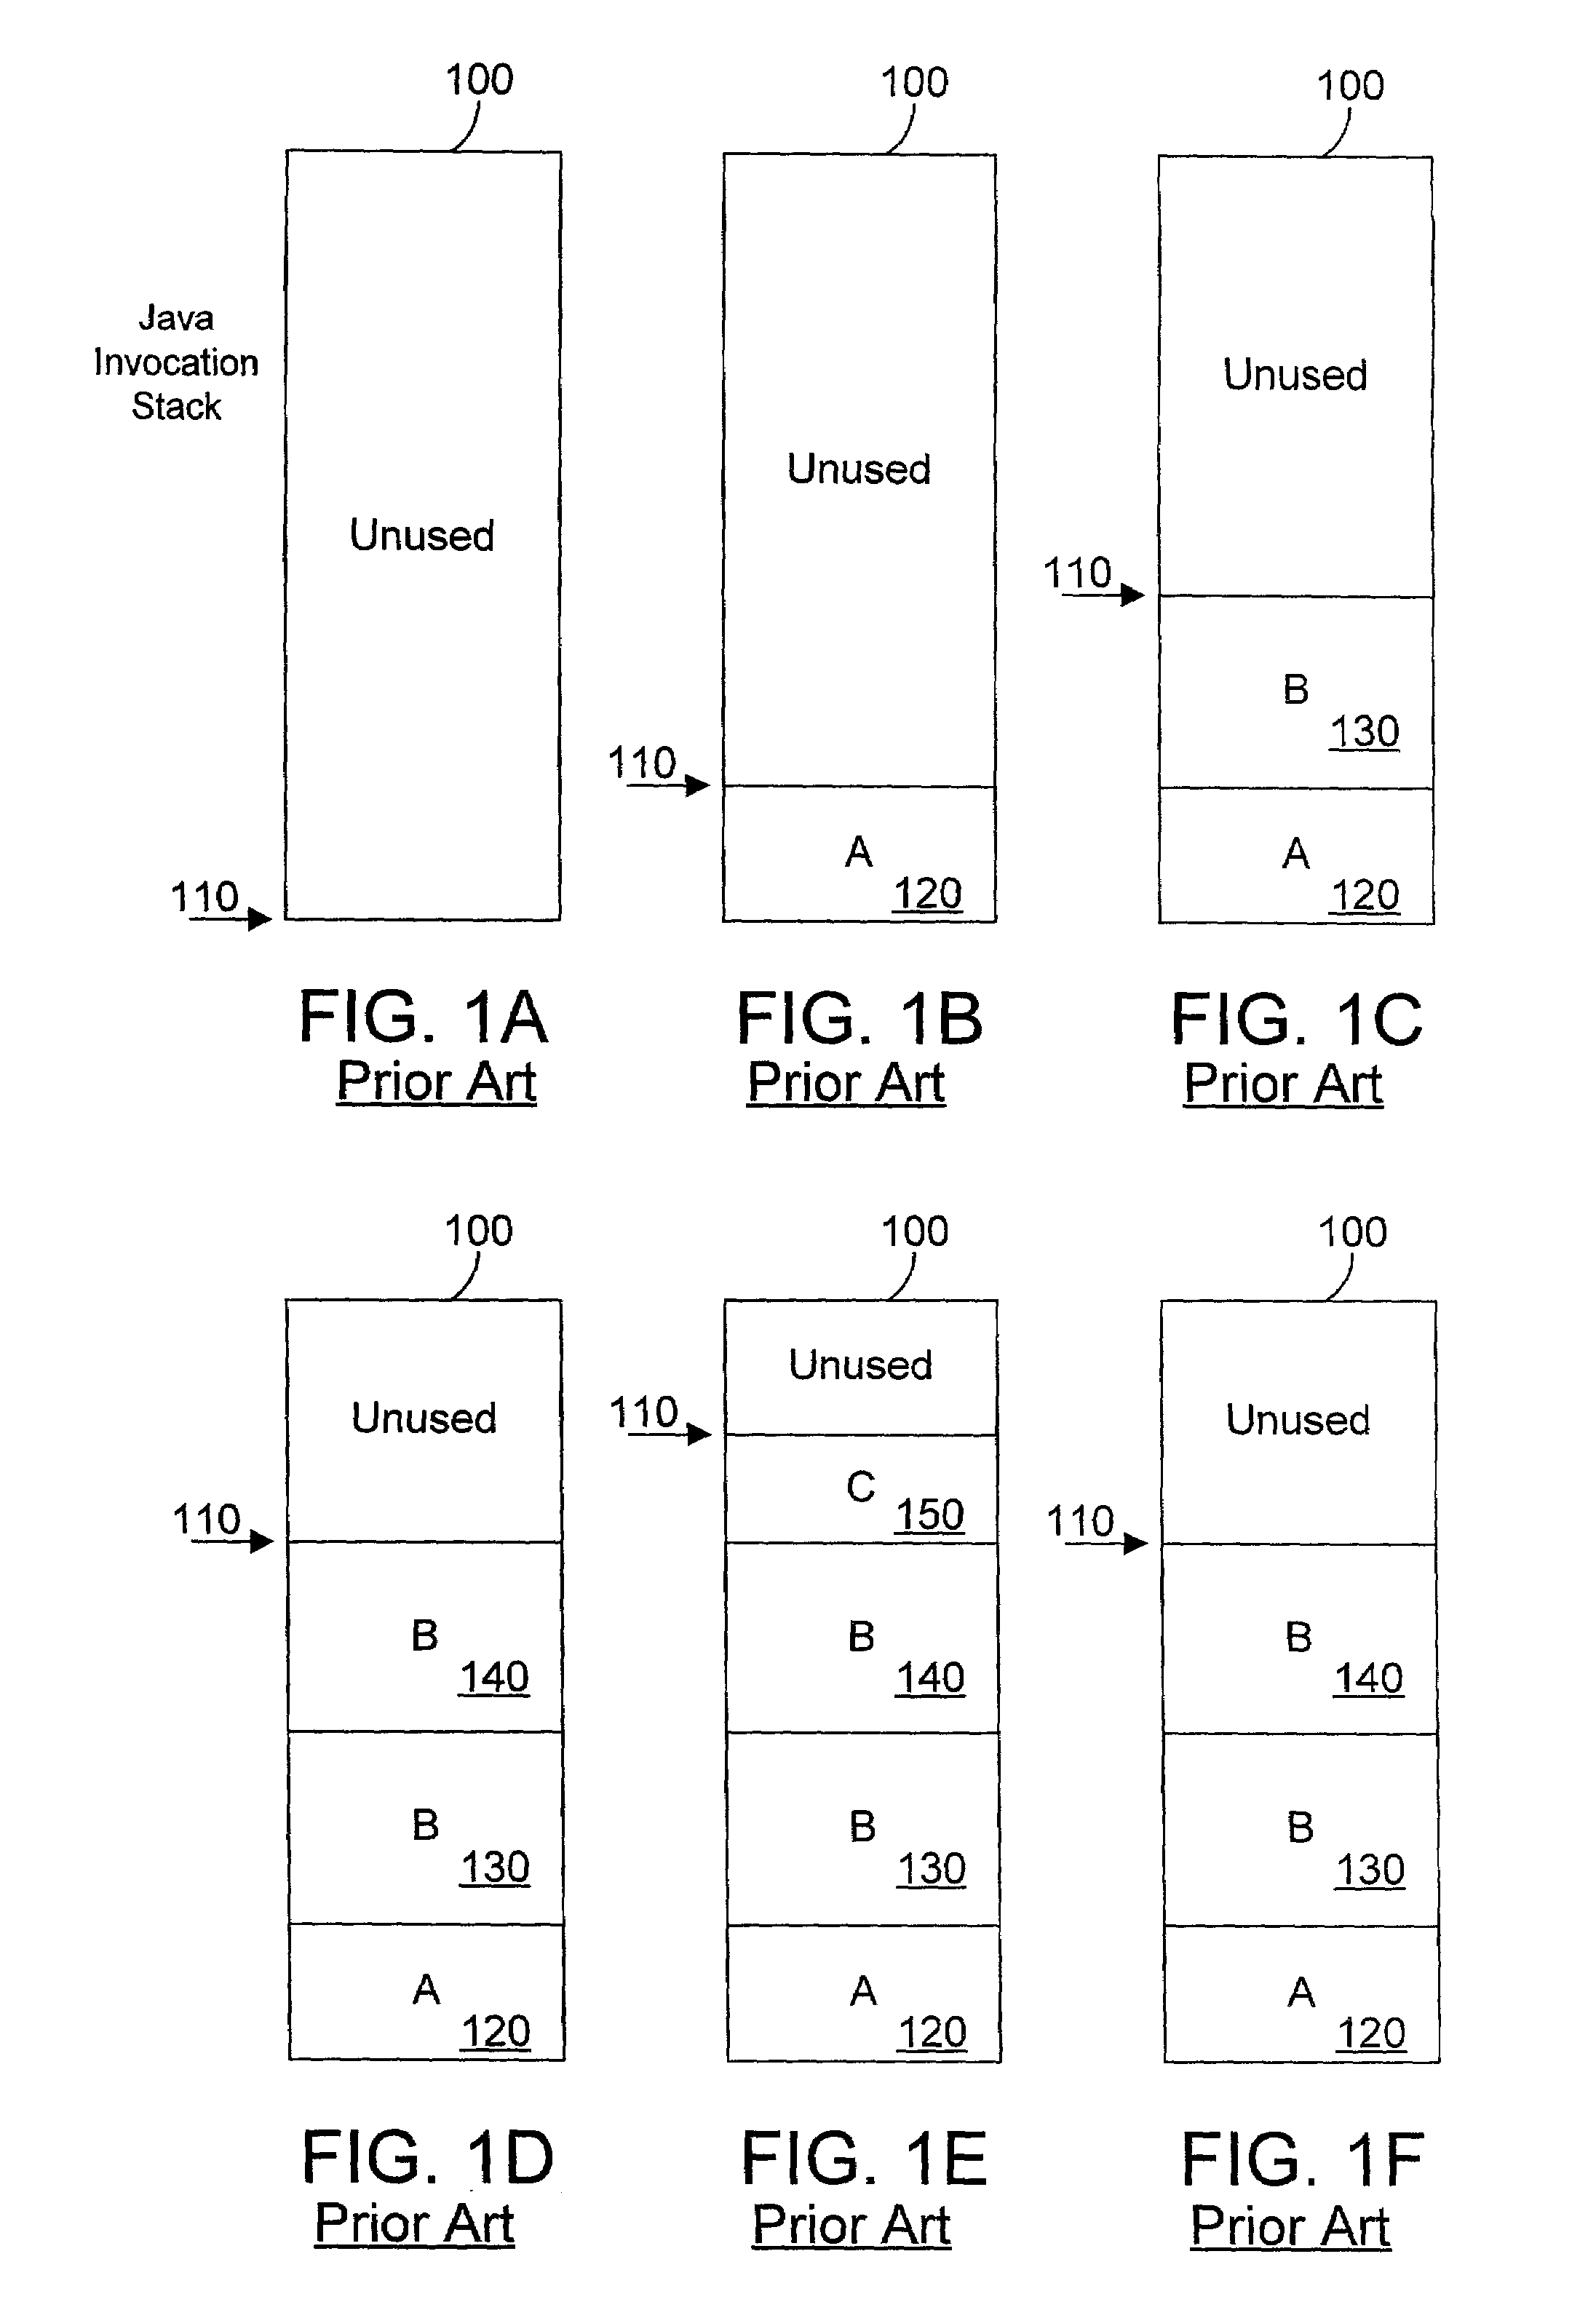 Object oriented apparatus and method for allocating objects on an invocation stack in a dynamic compilation environment